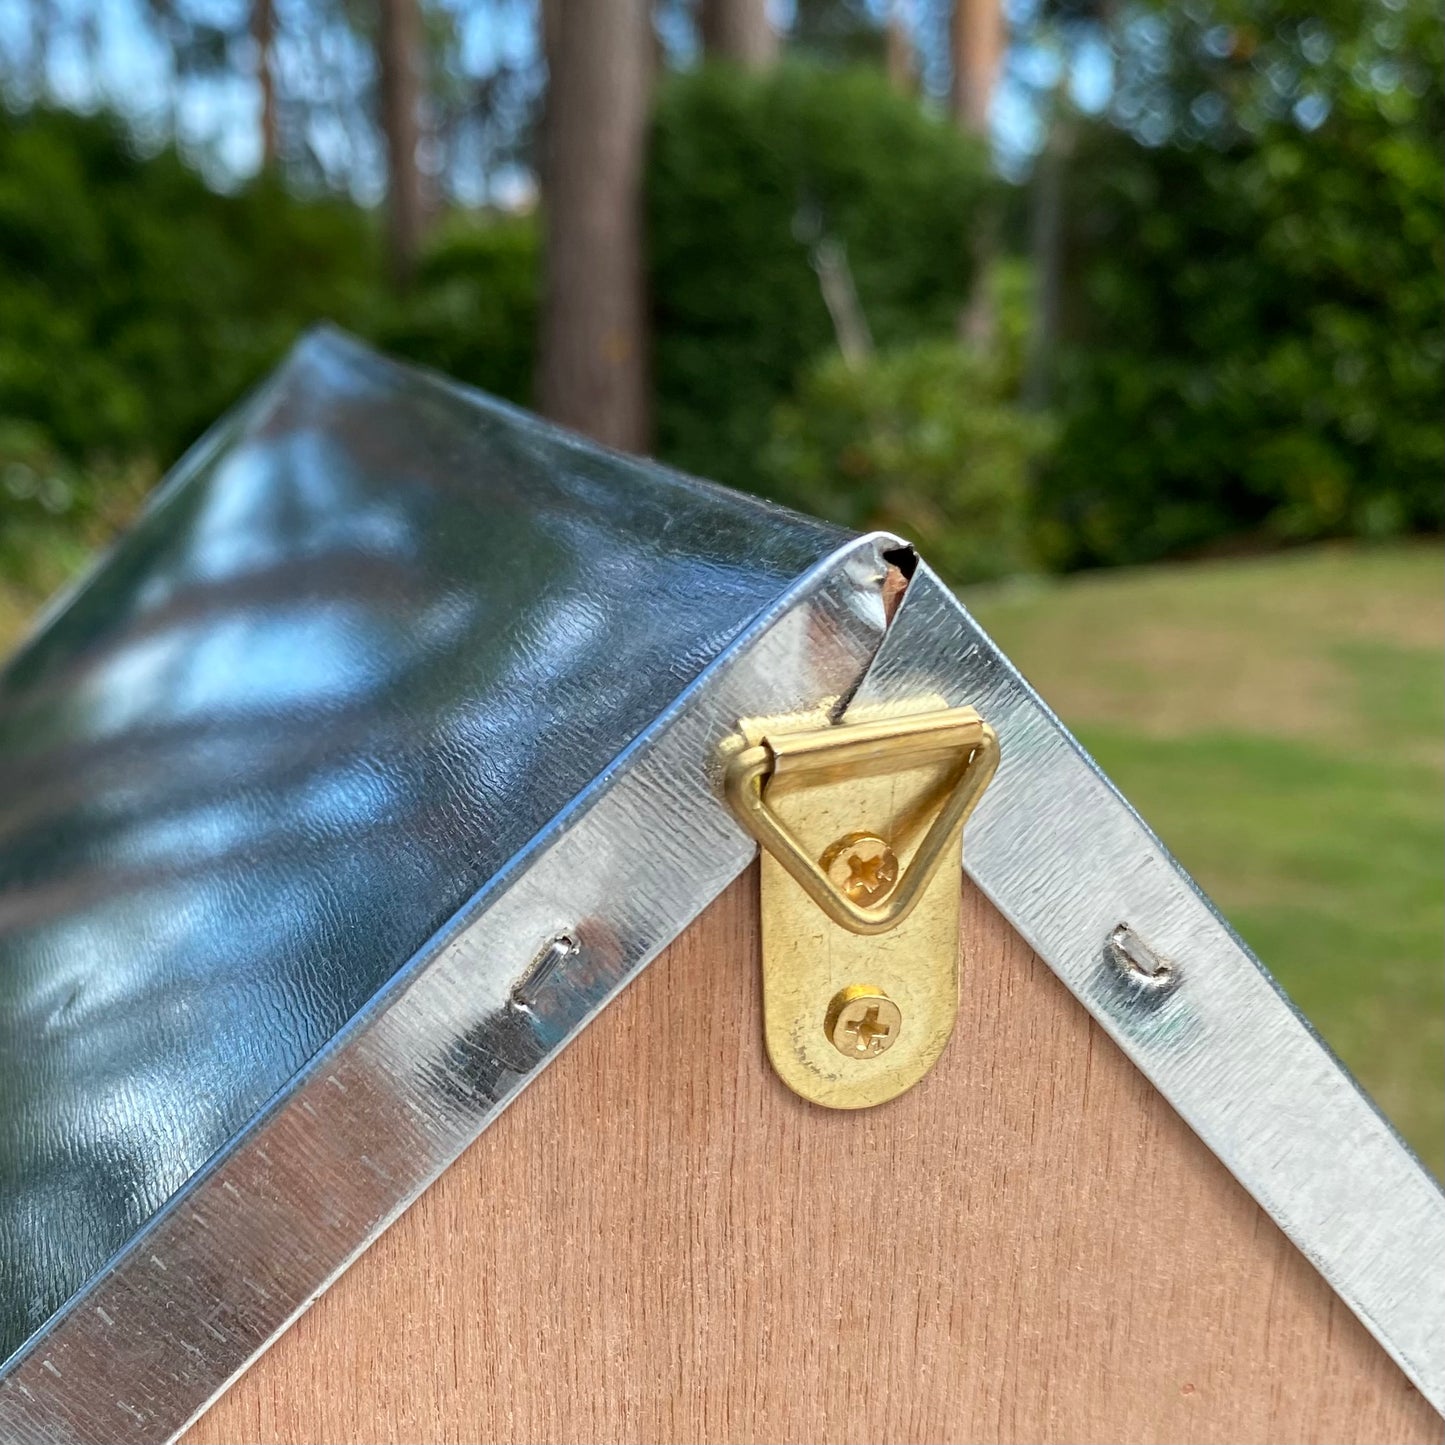 Squirrel Nest Box With Metal Roof